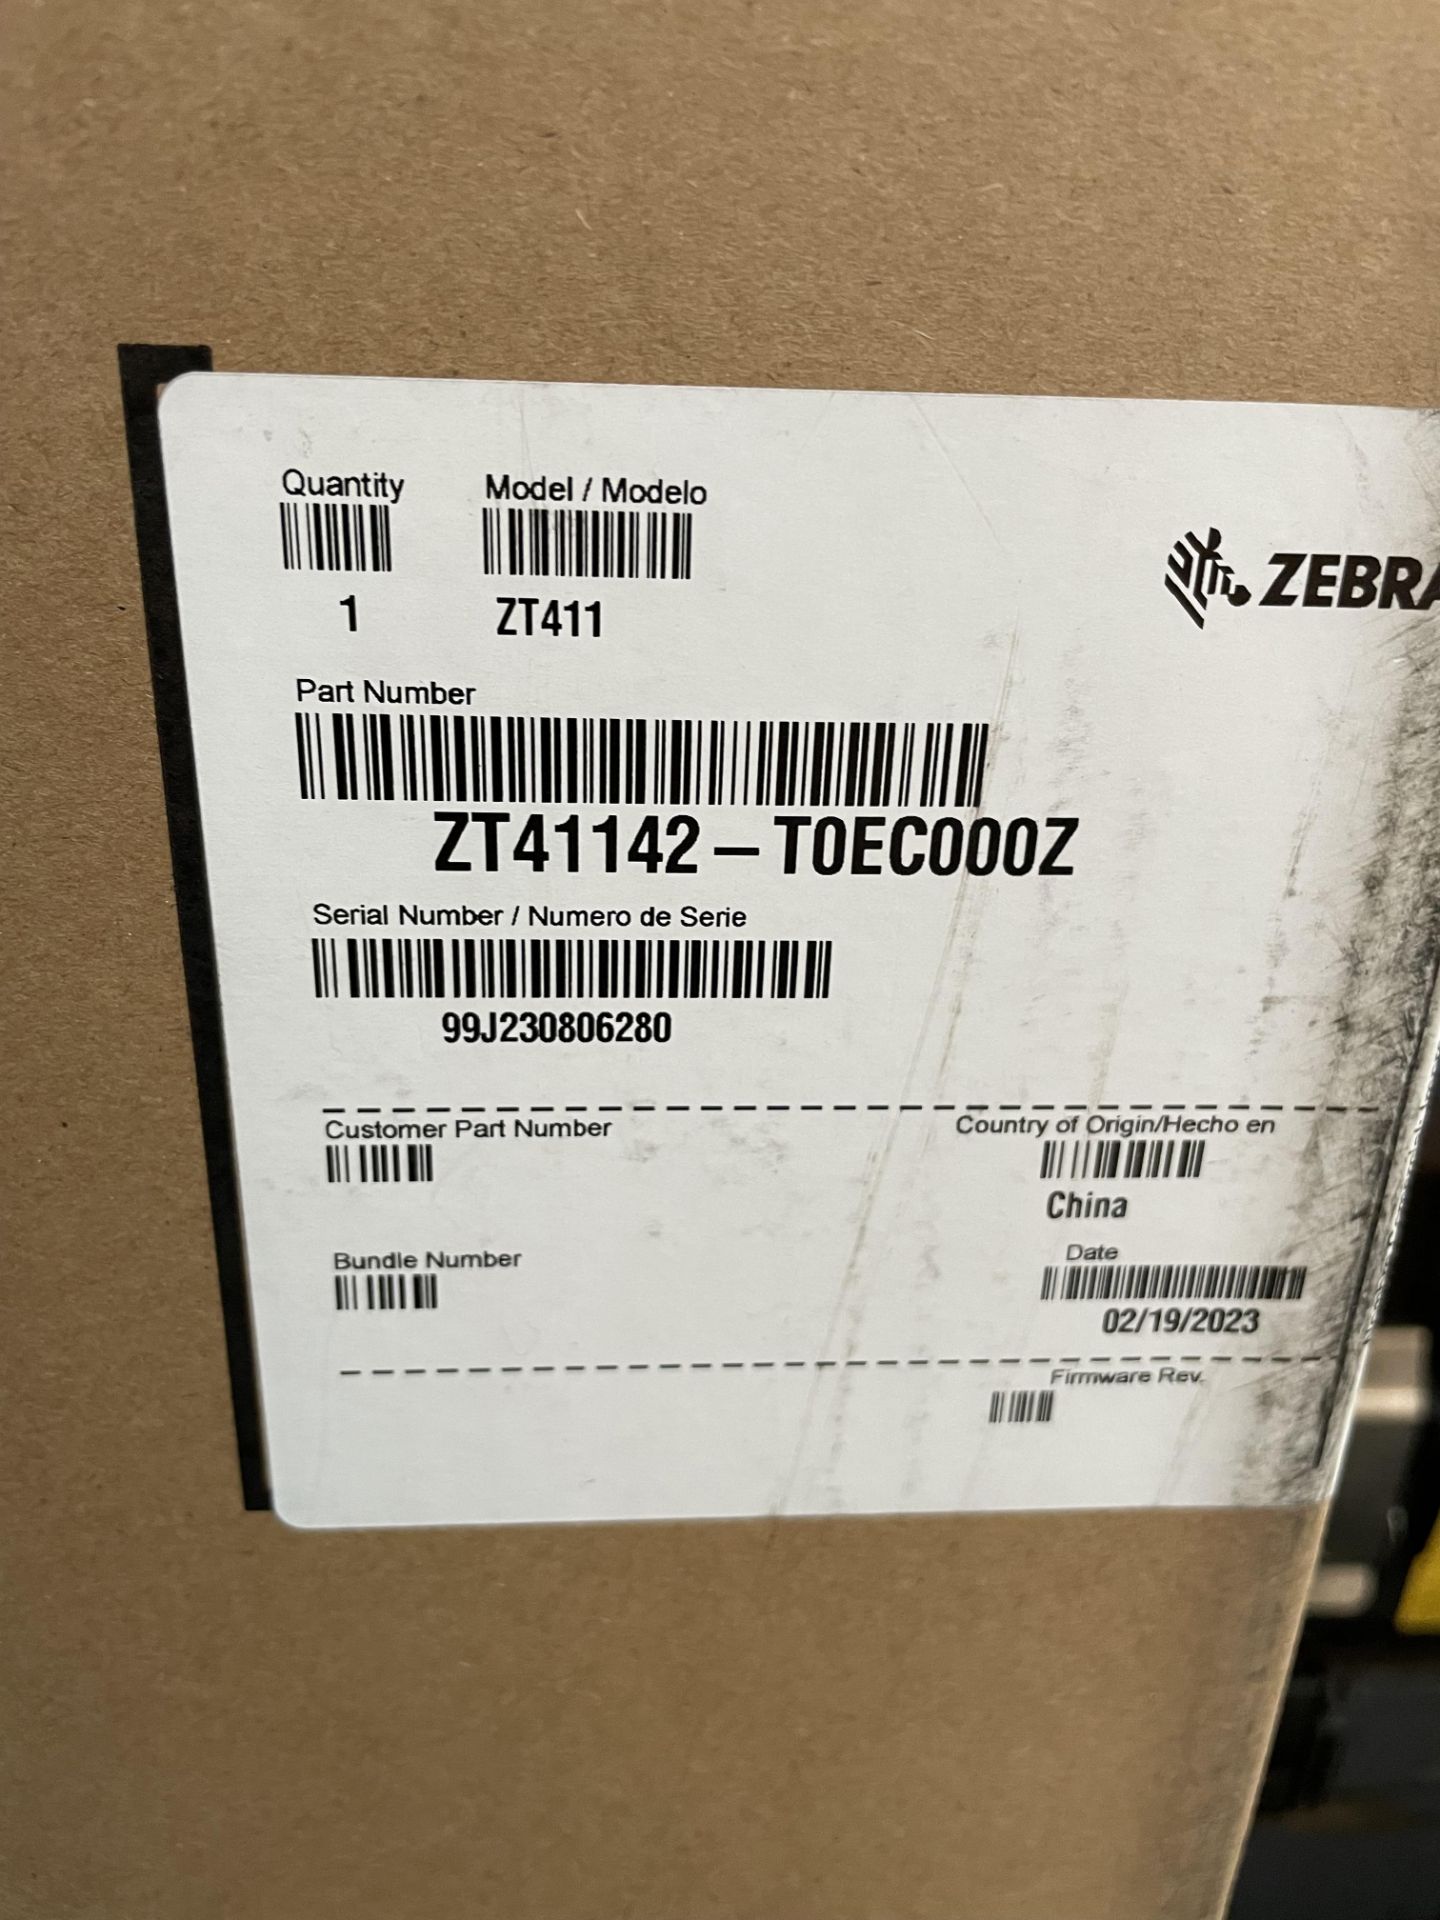 Zebra ZT411 Thermal Barcode Label Printer (Boxed Unused) Please read the following important notes:- - Image 2 of 3